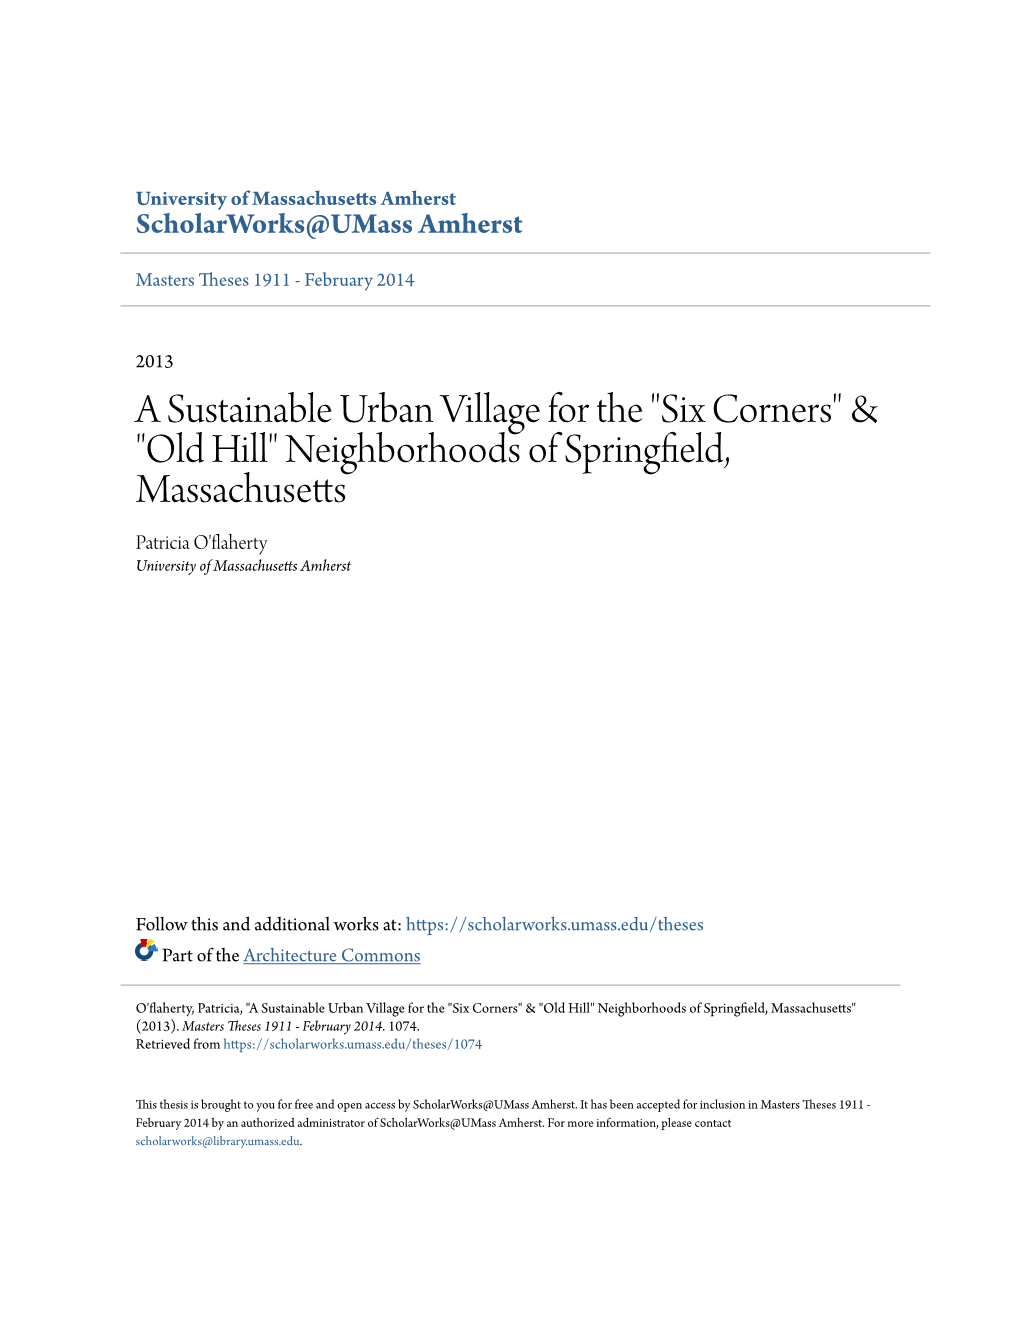 A Sustainable Urban Village for the "Six Corners" & "Old Hill" Neighborhoods of Springfield, Massachusetts Patricia O'flaherty University of Massachusetts Amherst